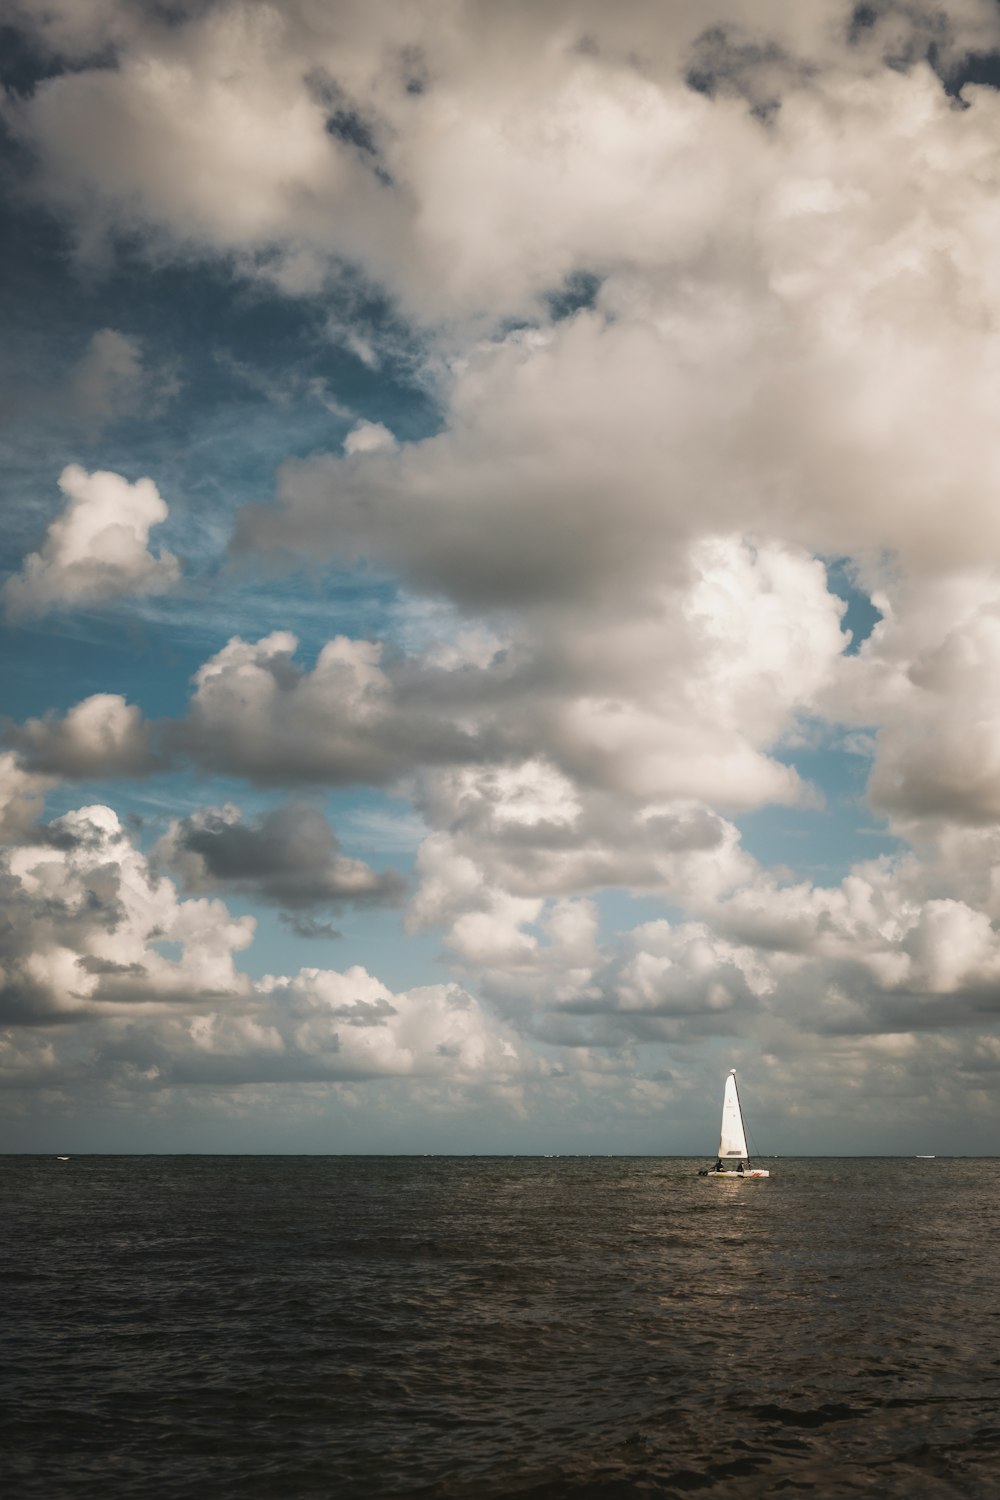 a sailboat in the middle of the ocean under a cloudy sky